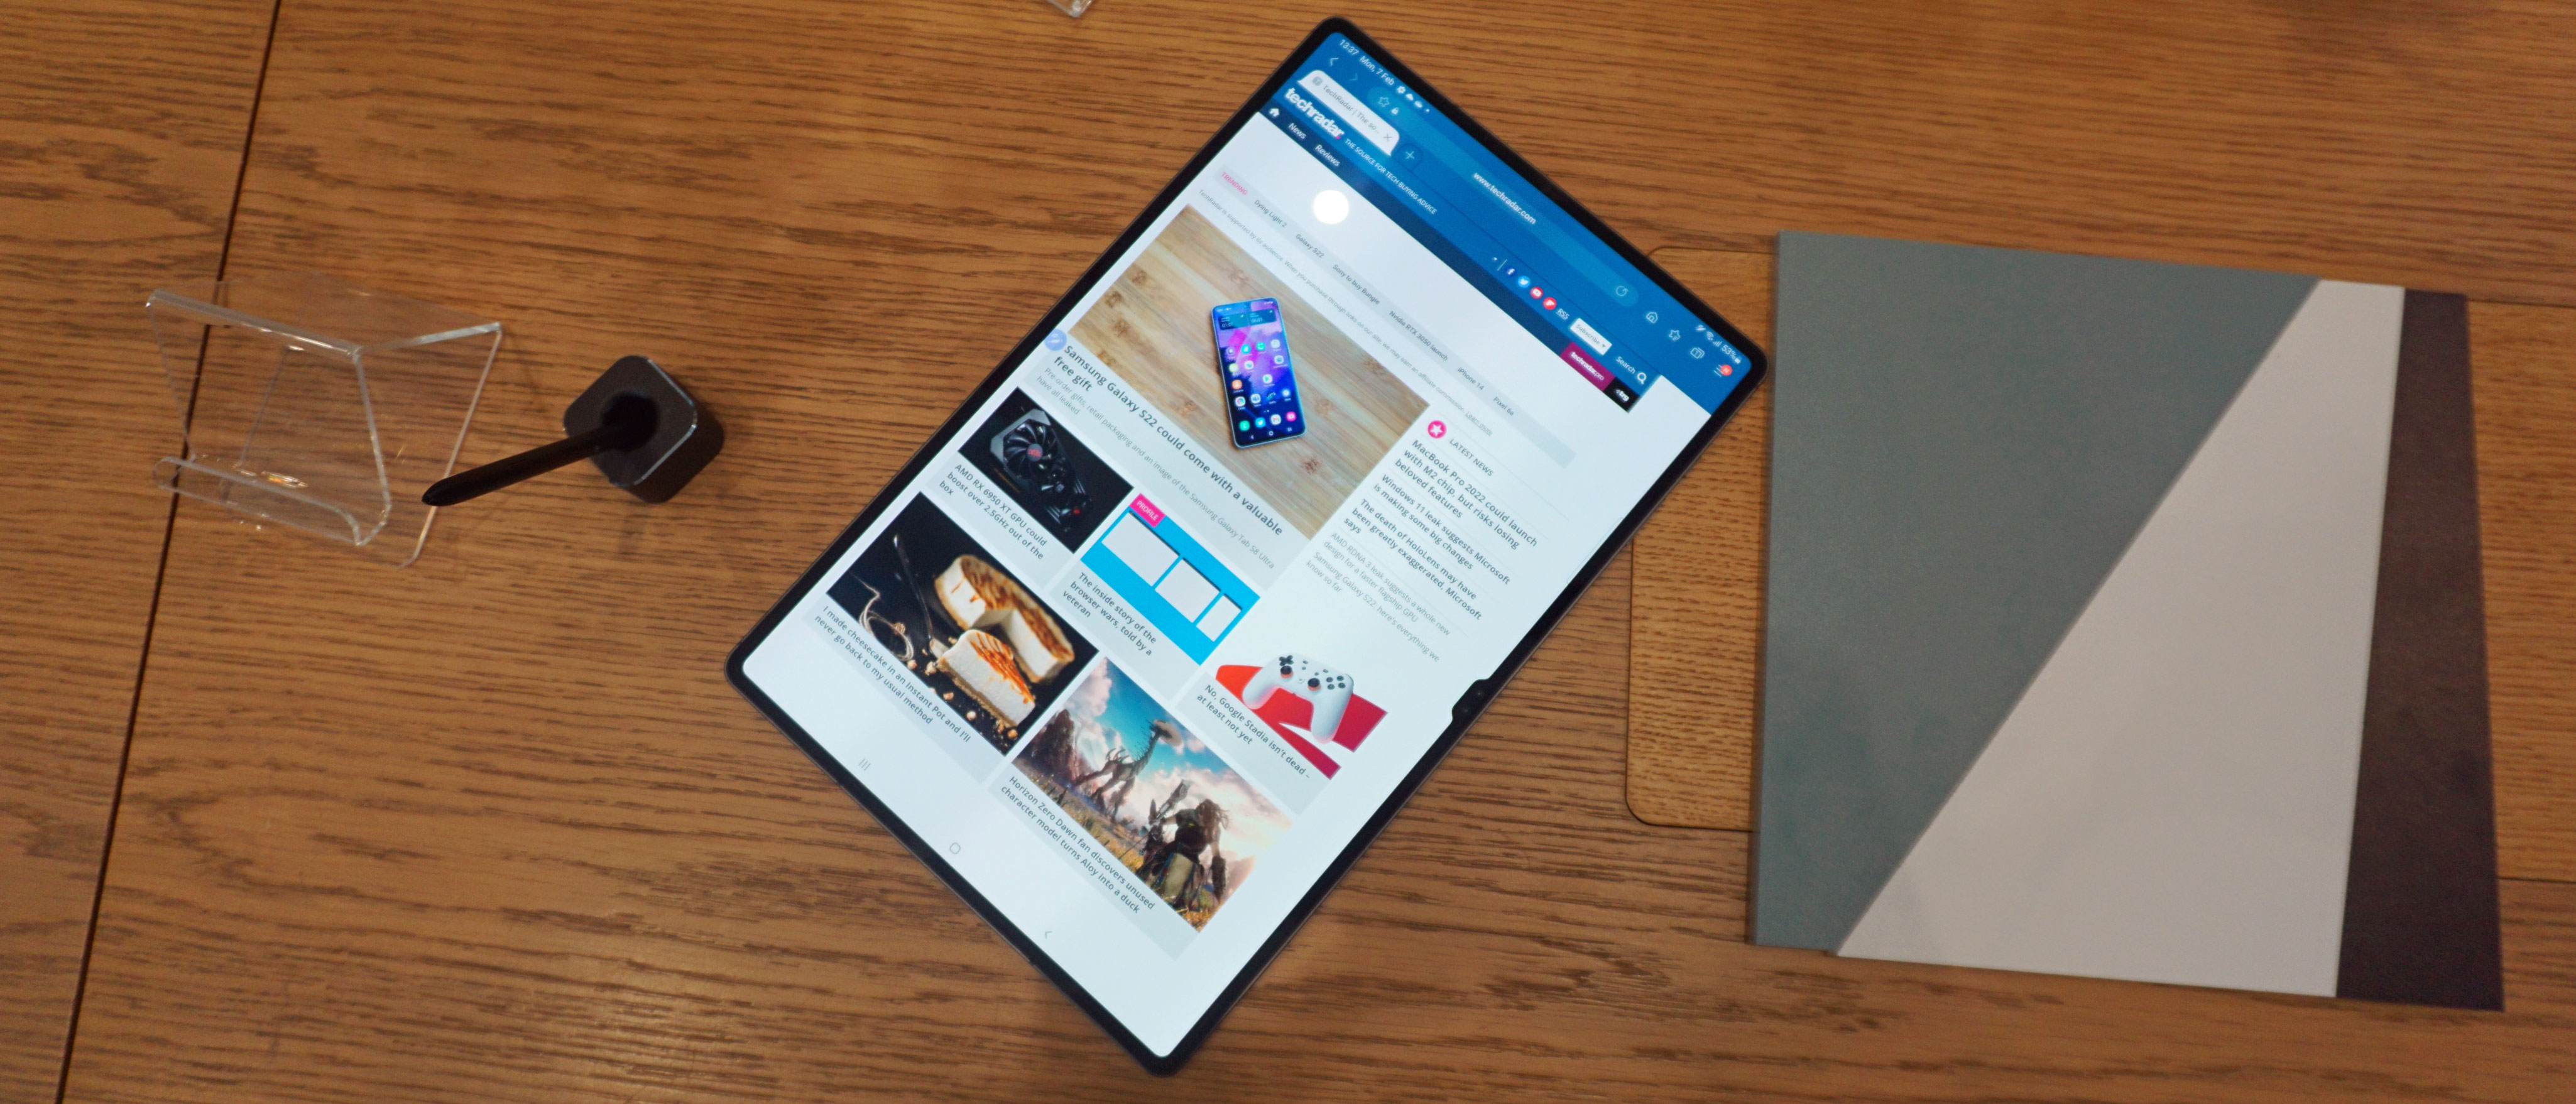 Samsung Galaxy Tab S8 Ultra: a gigantic Android tablet that